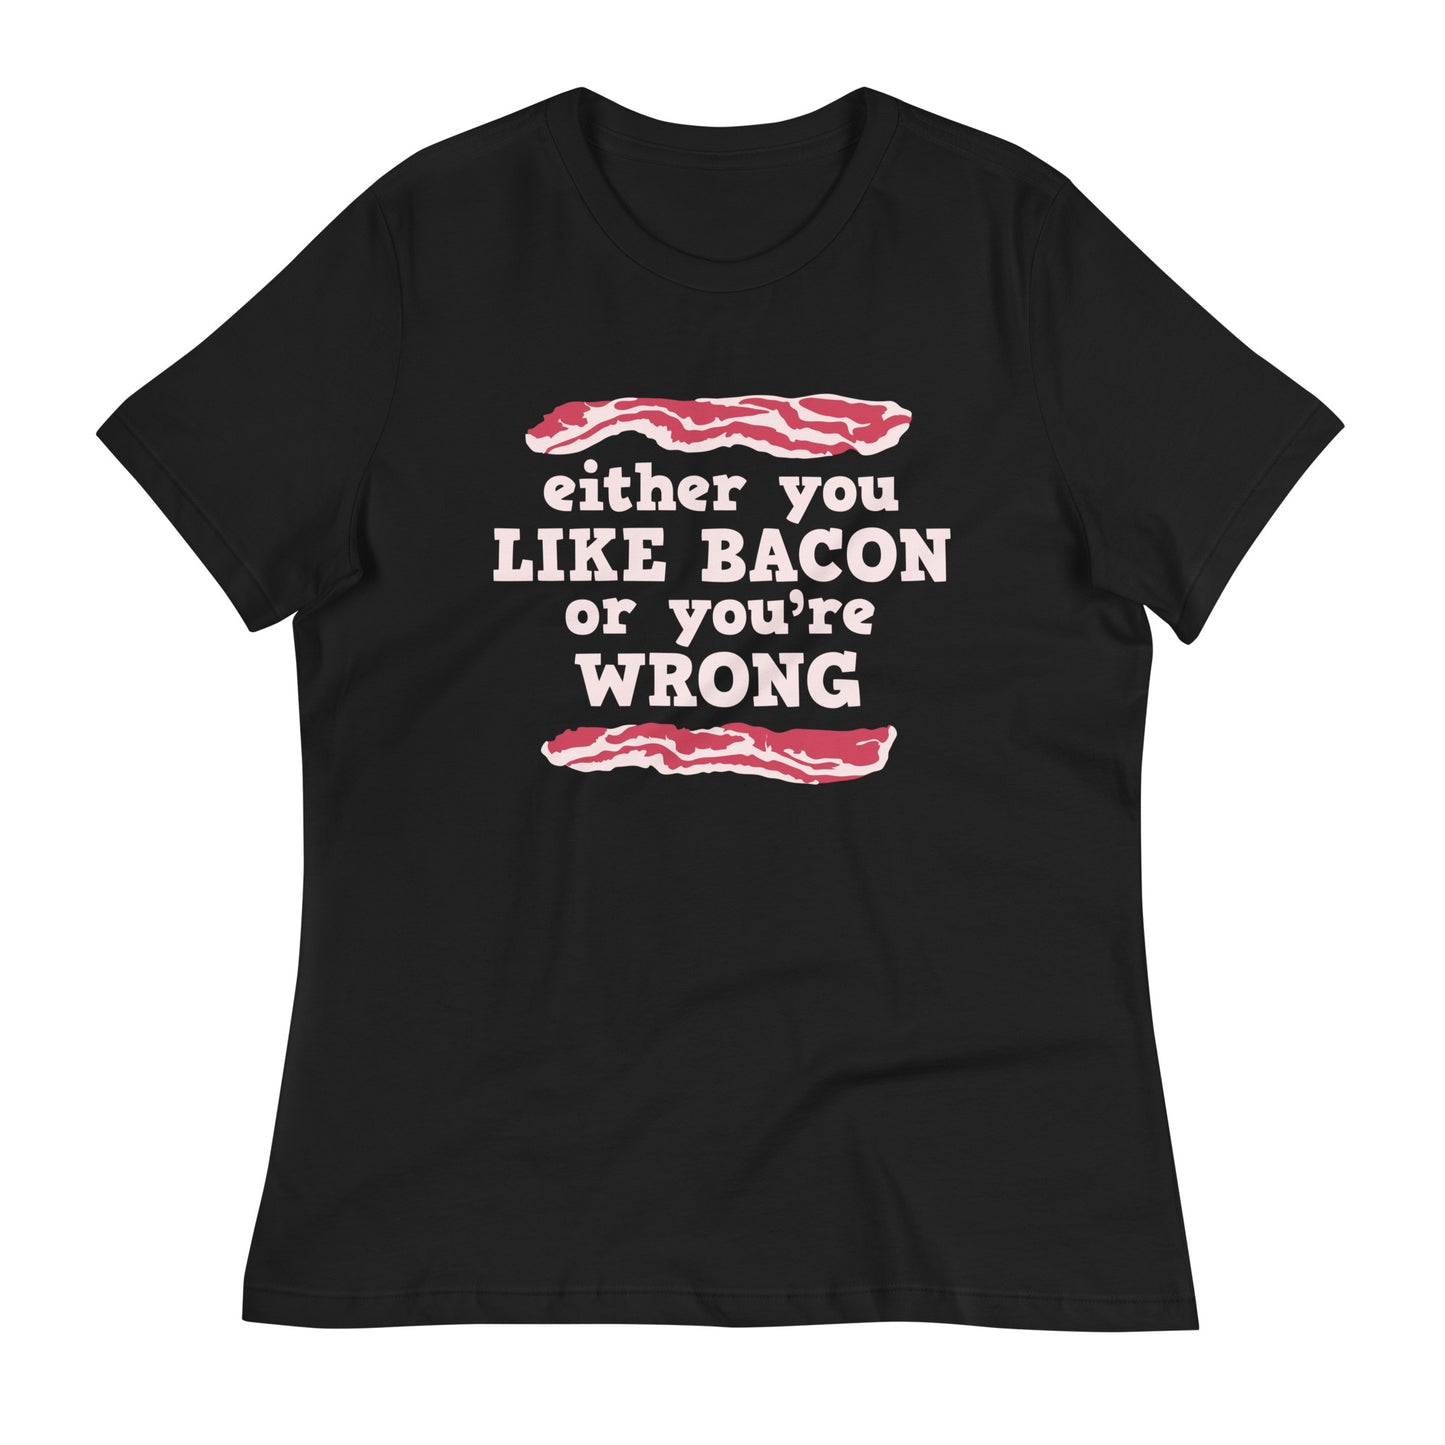 Either You Like Bacon Or You're Wrong Women's Signature Tee